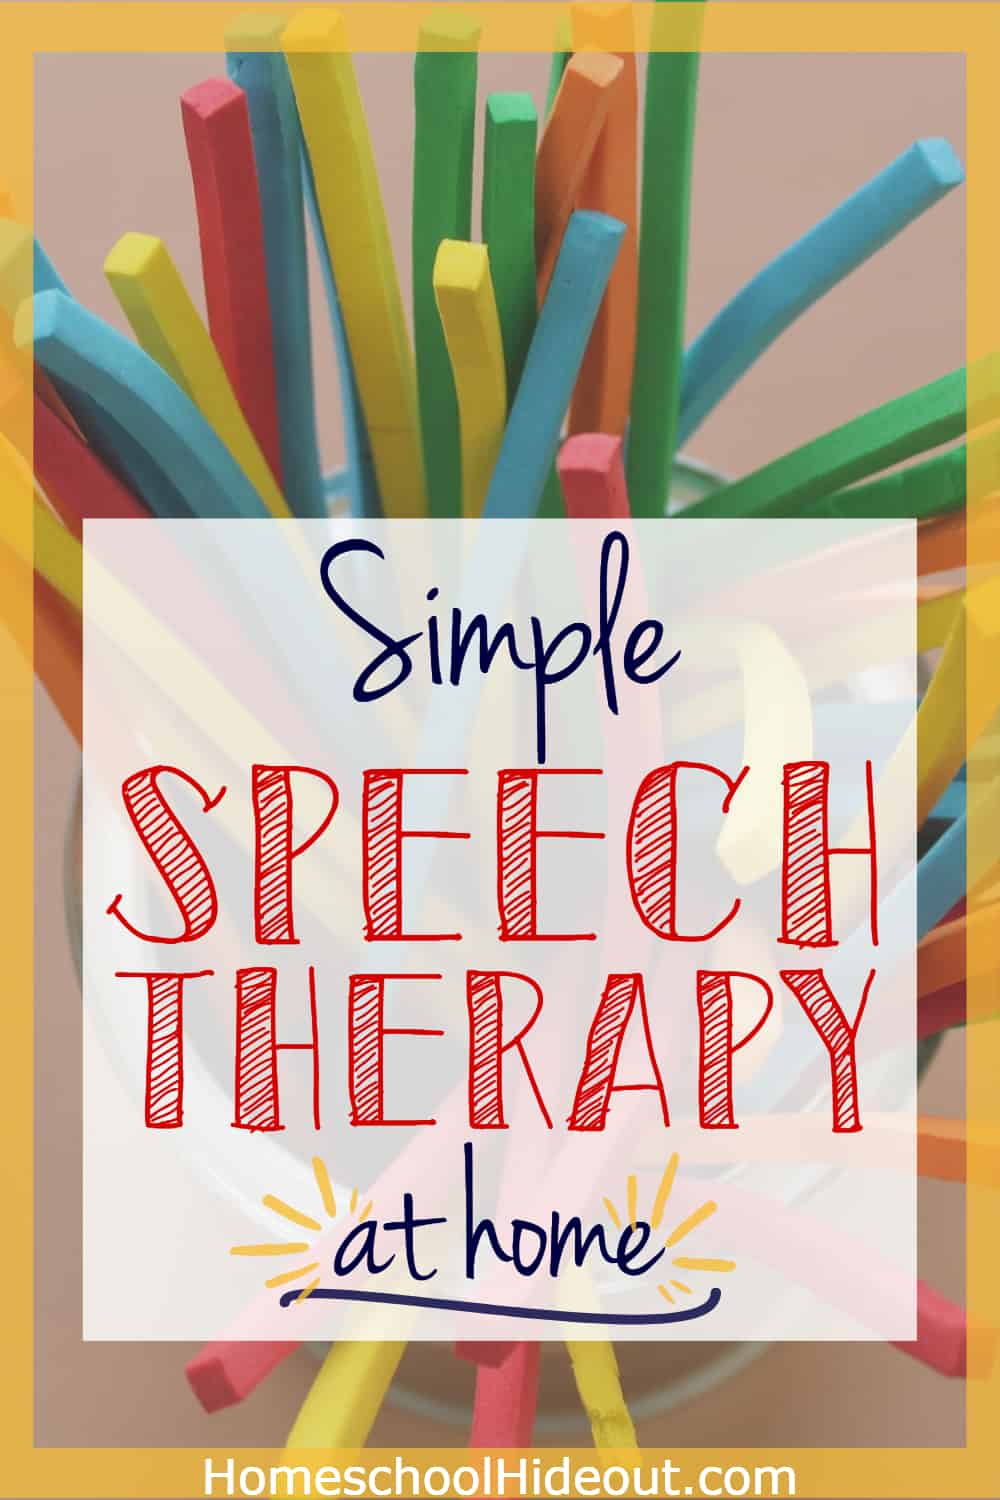 Great ideas for speech therapy at home!